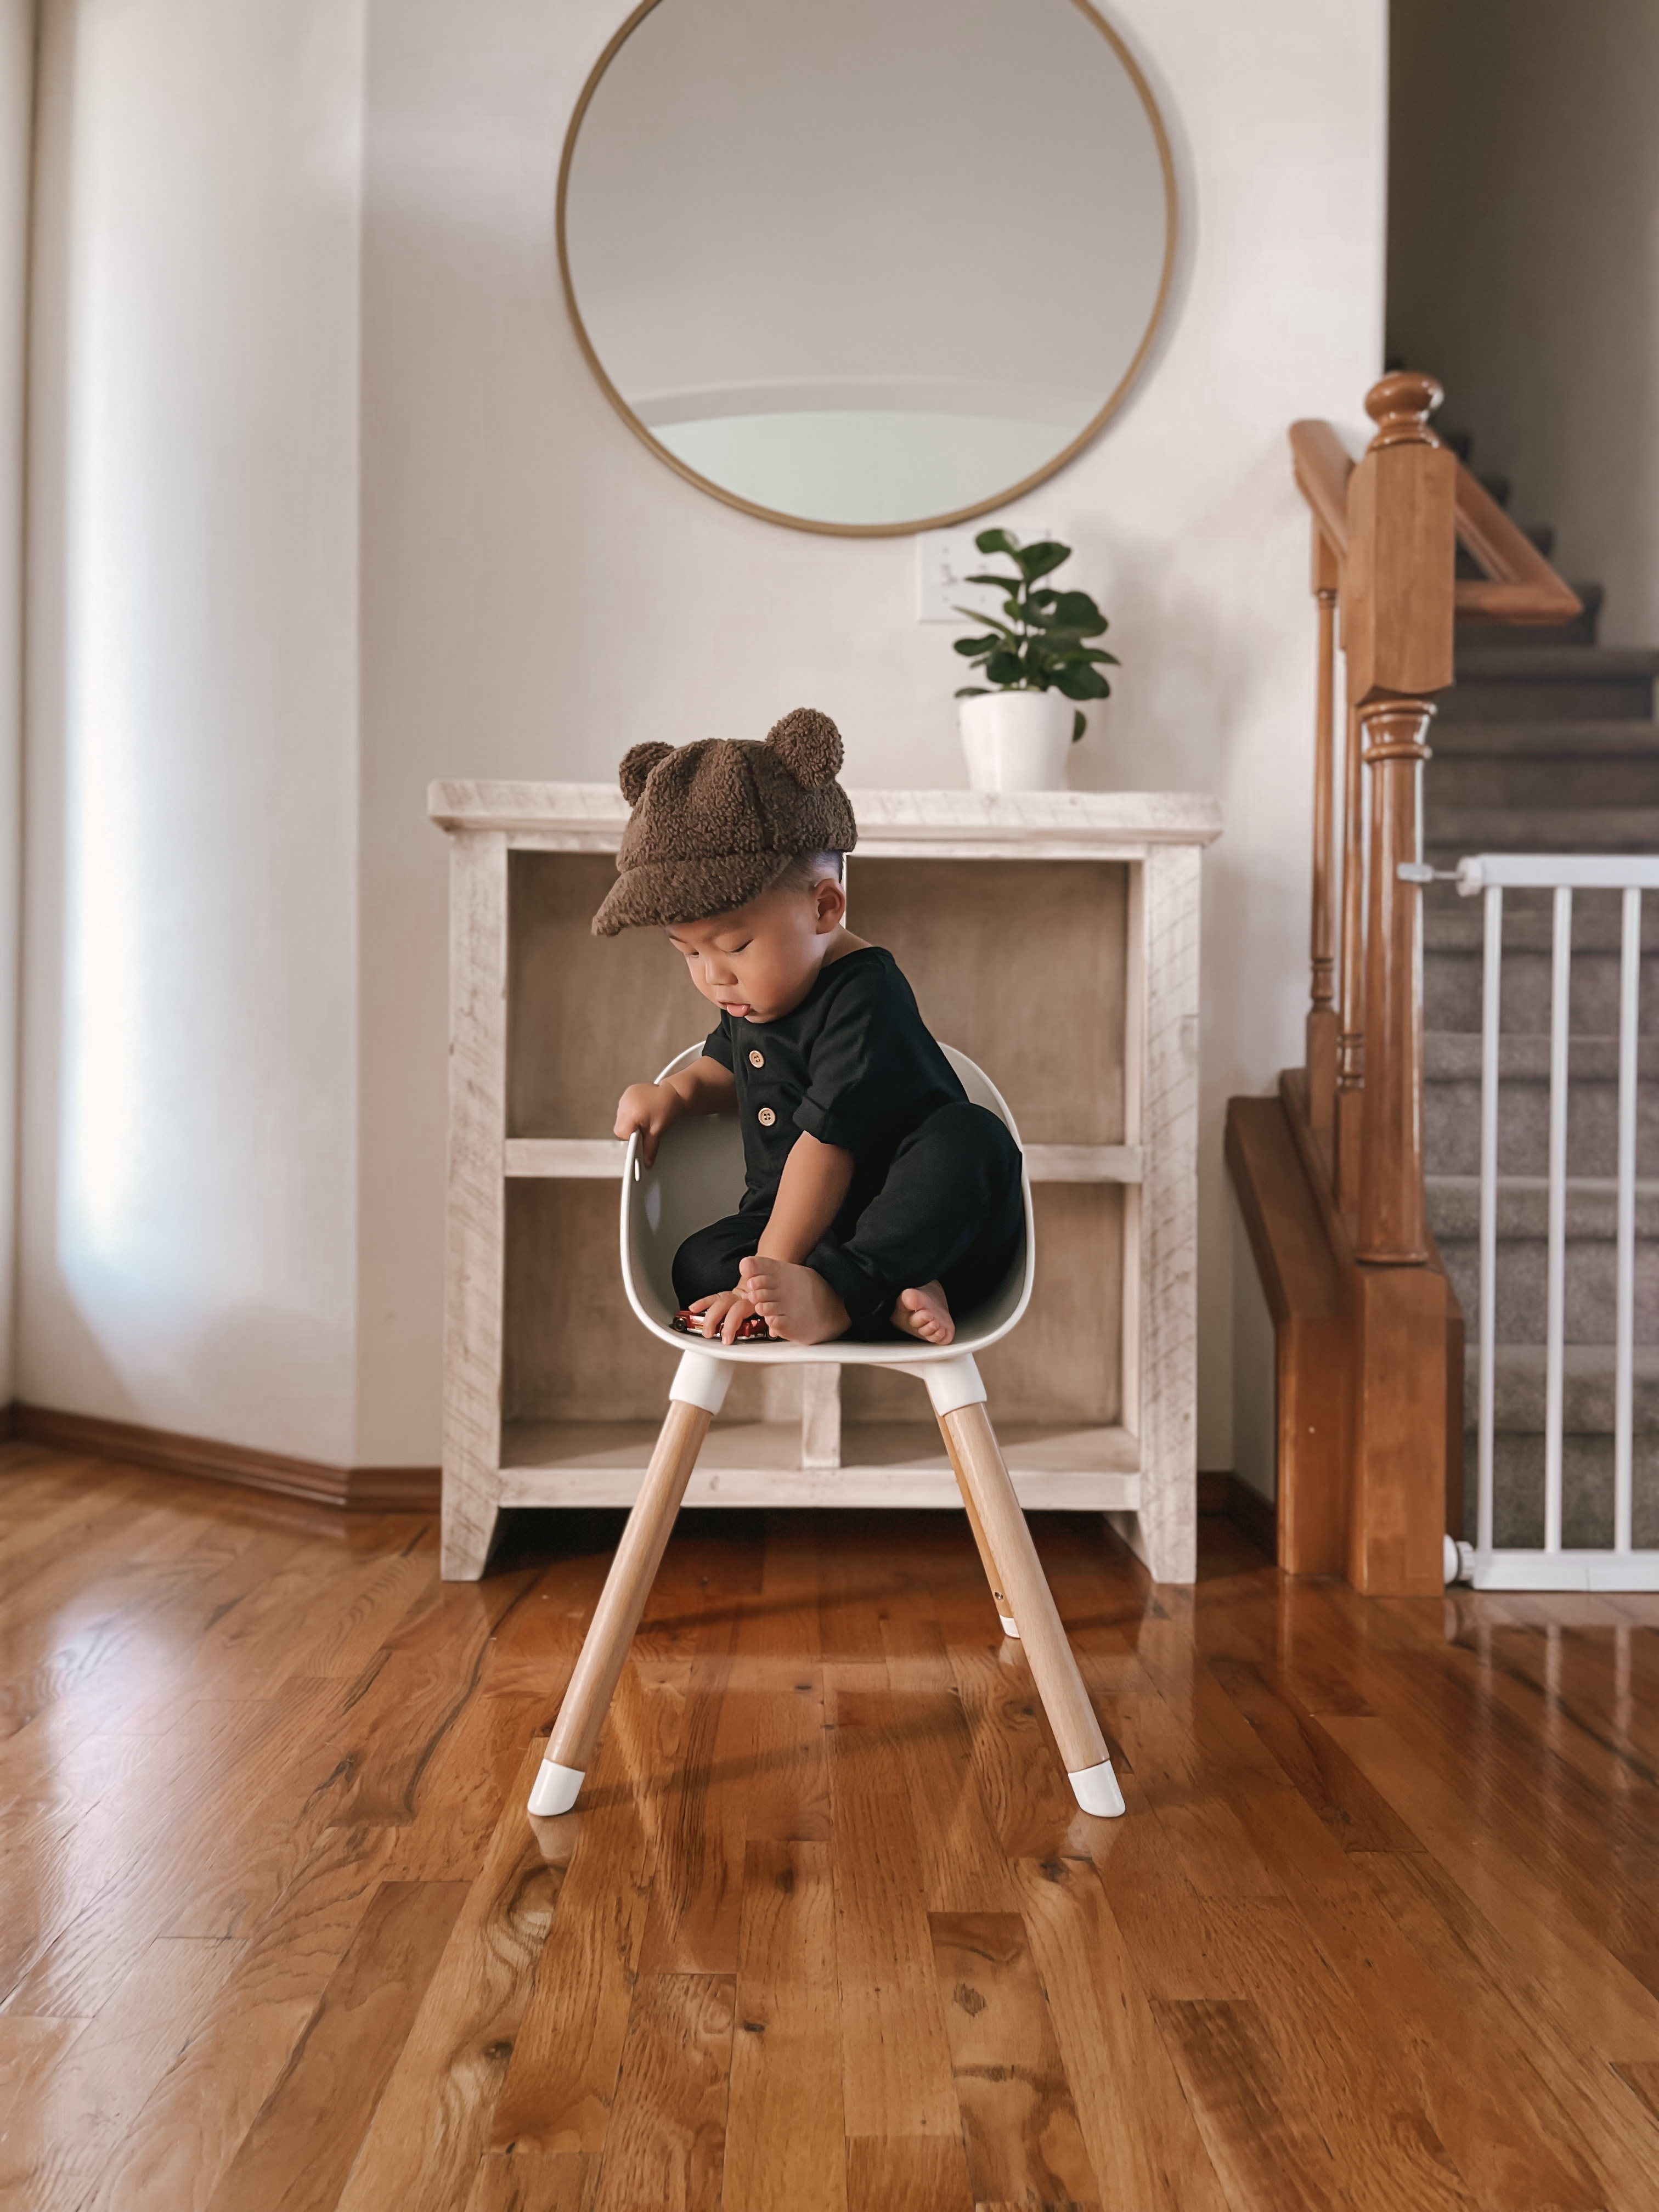 From Purees to Playdates, Here’s How This High Chair Was There For a Child’s Firsts